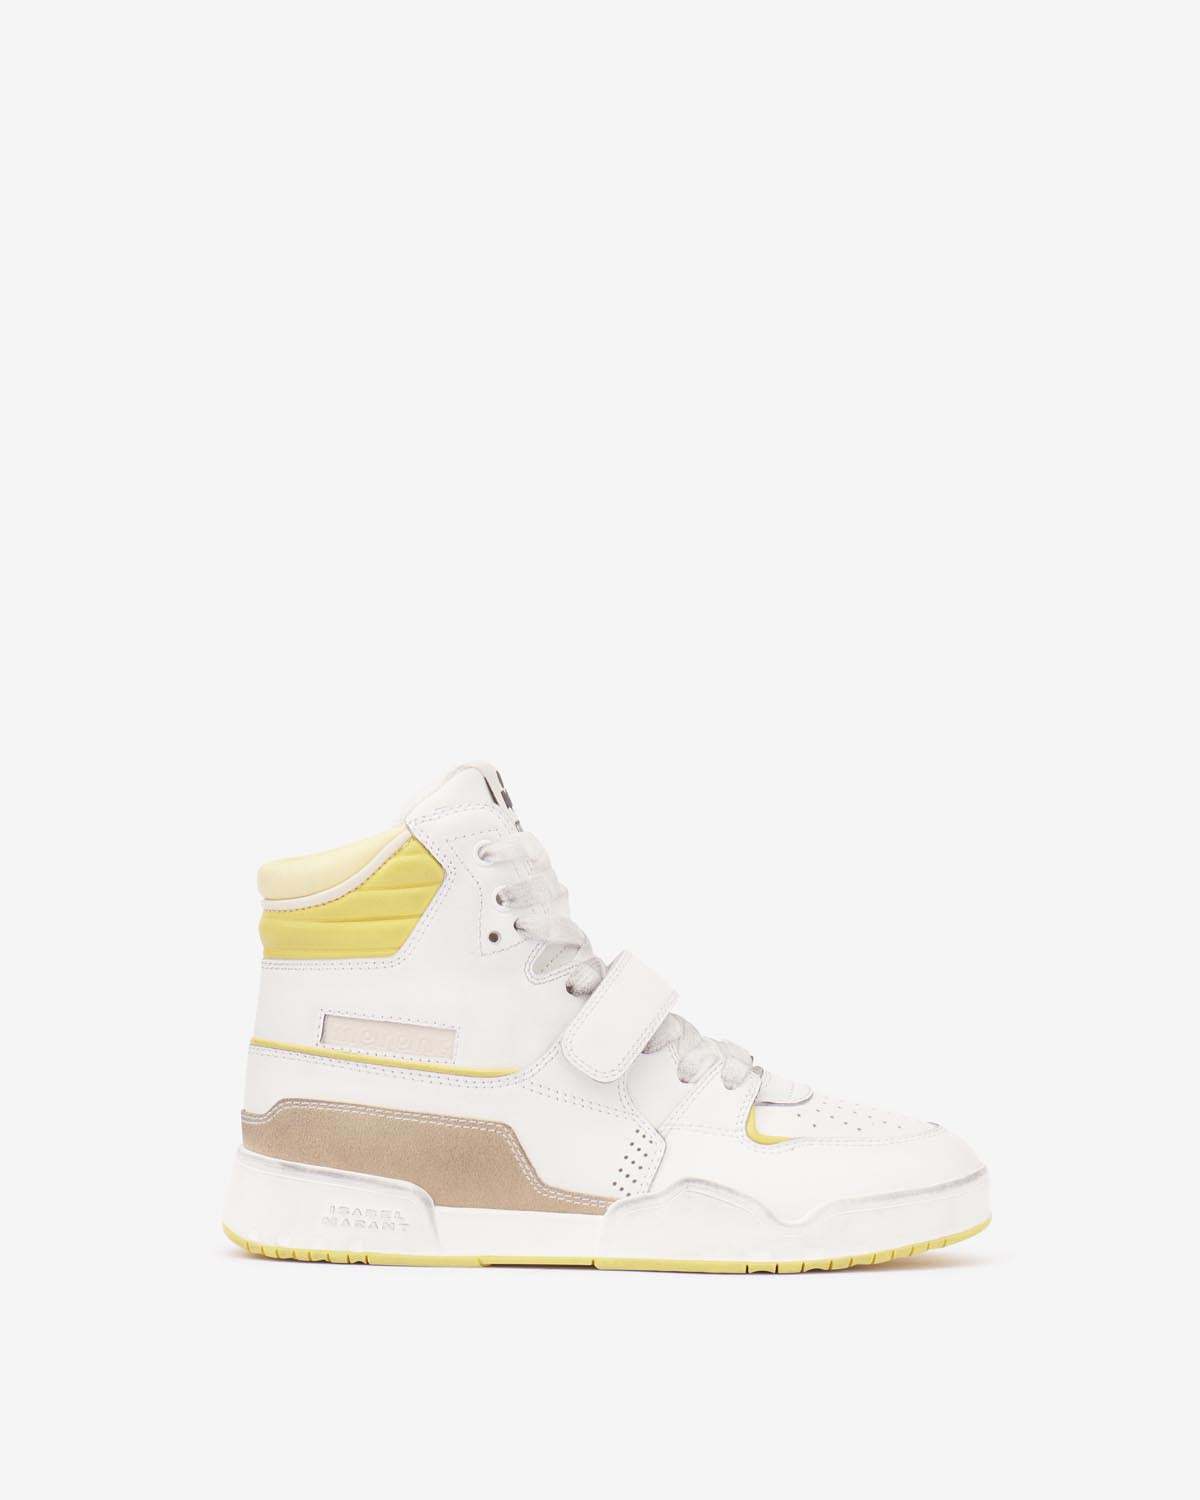 Alsee sneakers Woman Light yellow-yellow 11